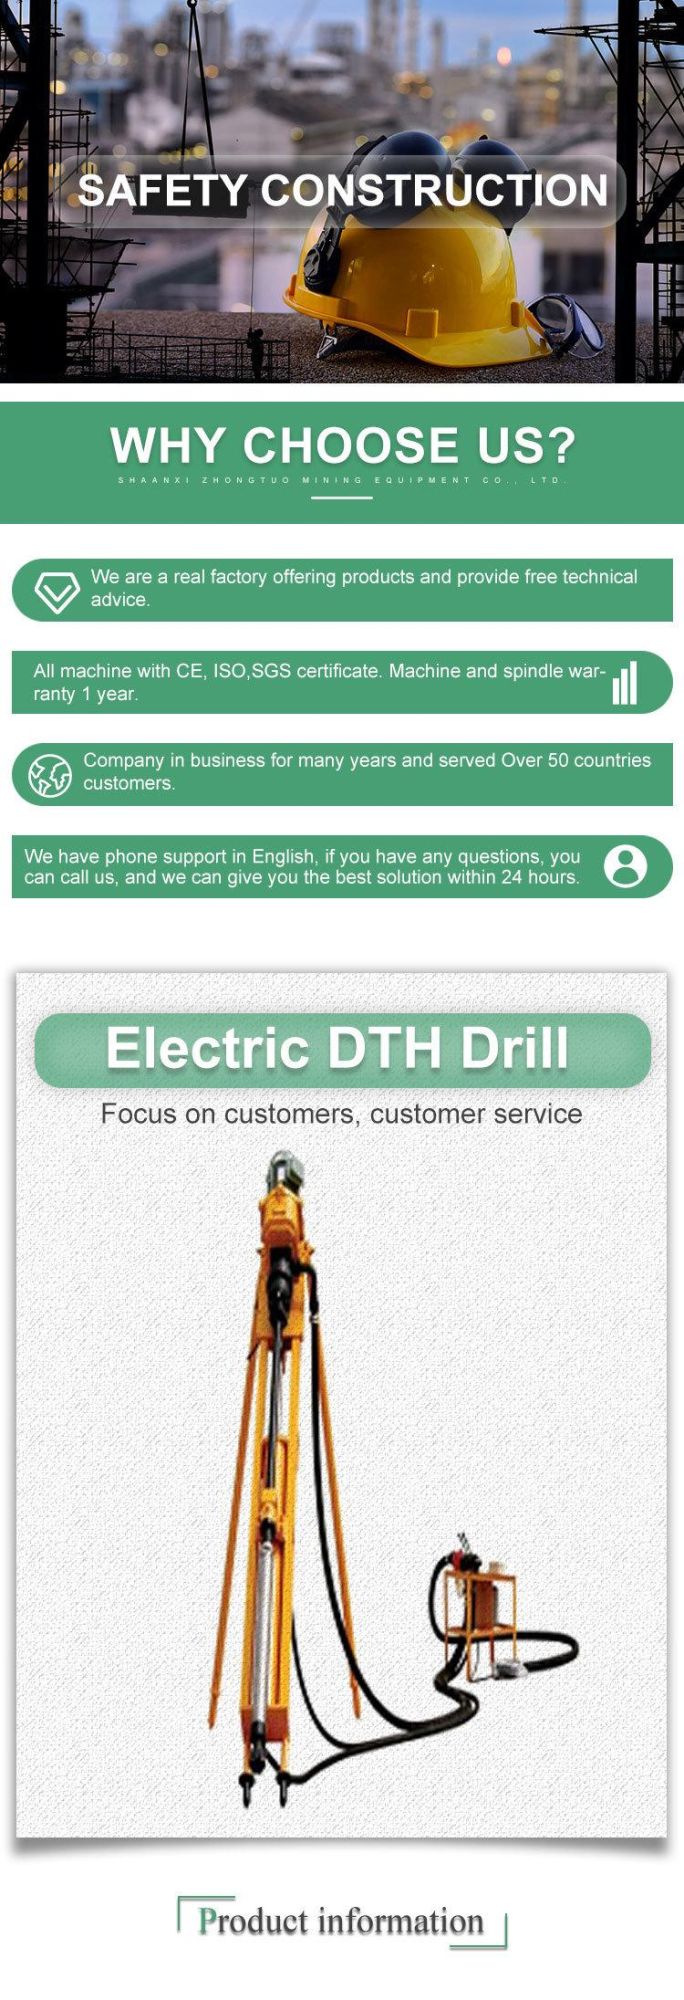 Pneumatic DTH Drilling Rig Electric DTH Drill